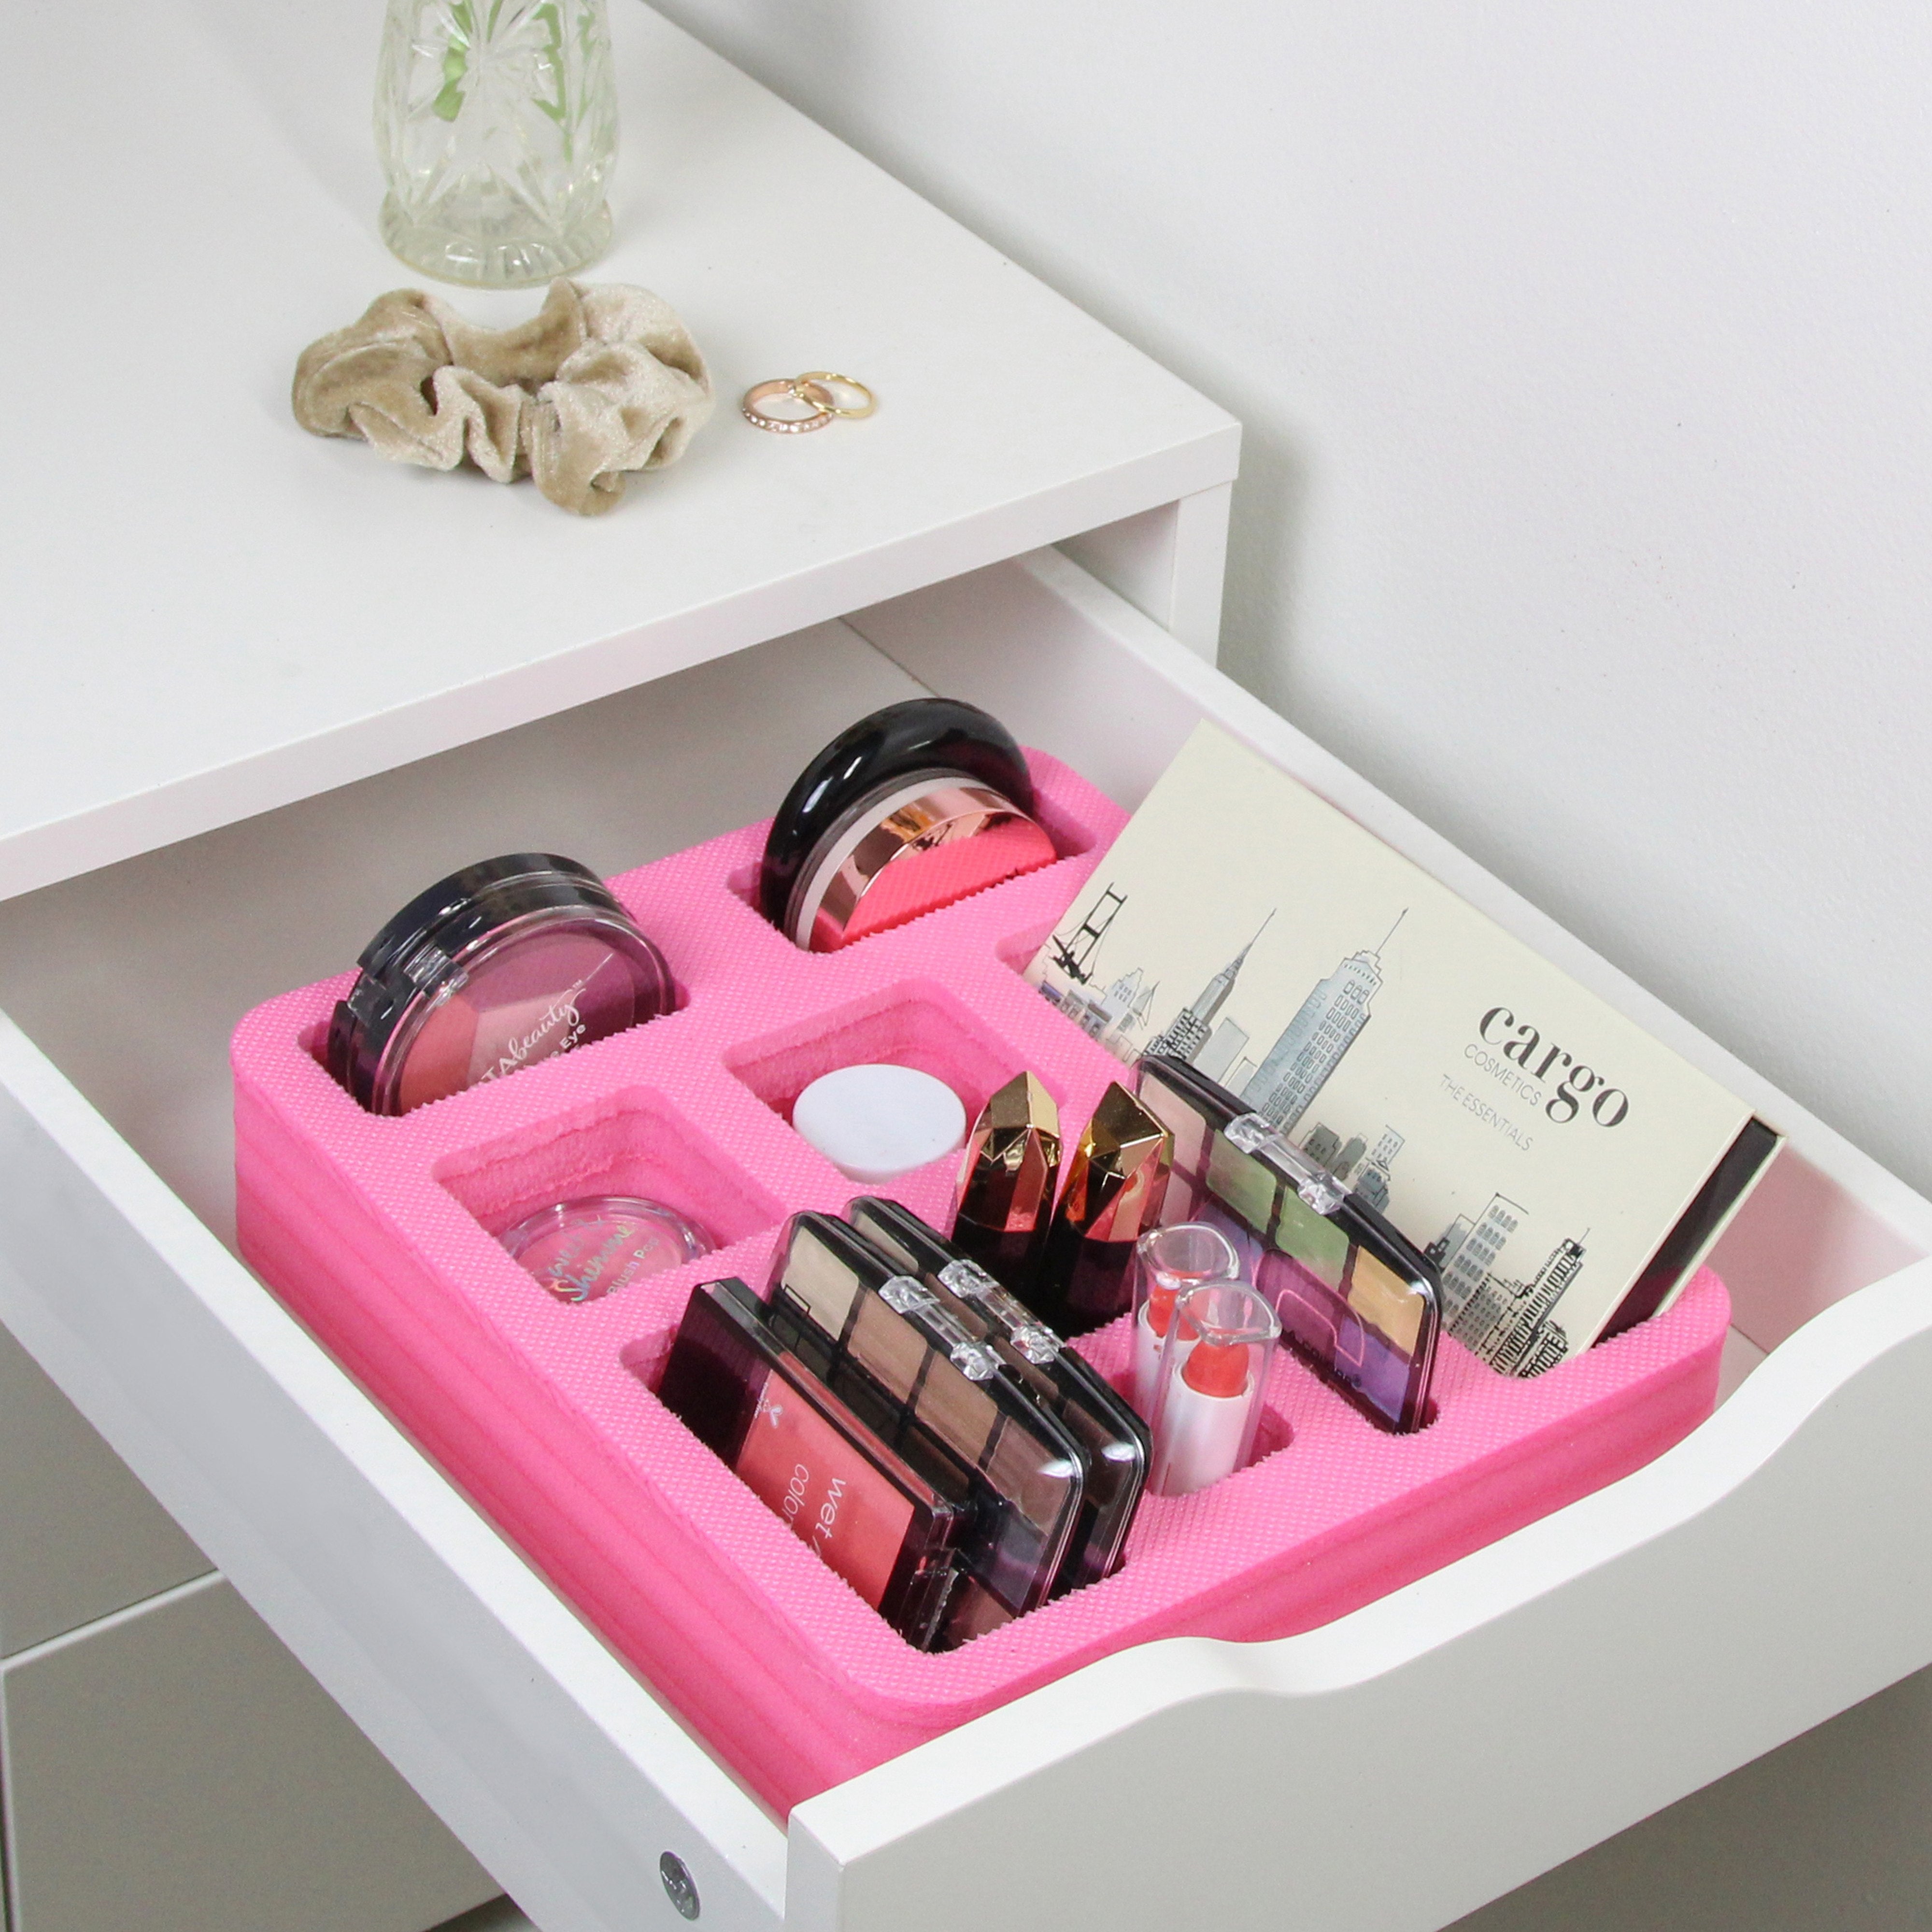 Makeup Drawer Tray Waterproof Durable Foam InsertHome Bathroom Bedroom Office 8.6 x 10.25 Inches 9 CompartmentsLipstick Eyeliner Cosmetics More